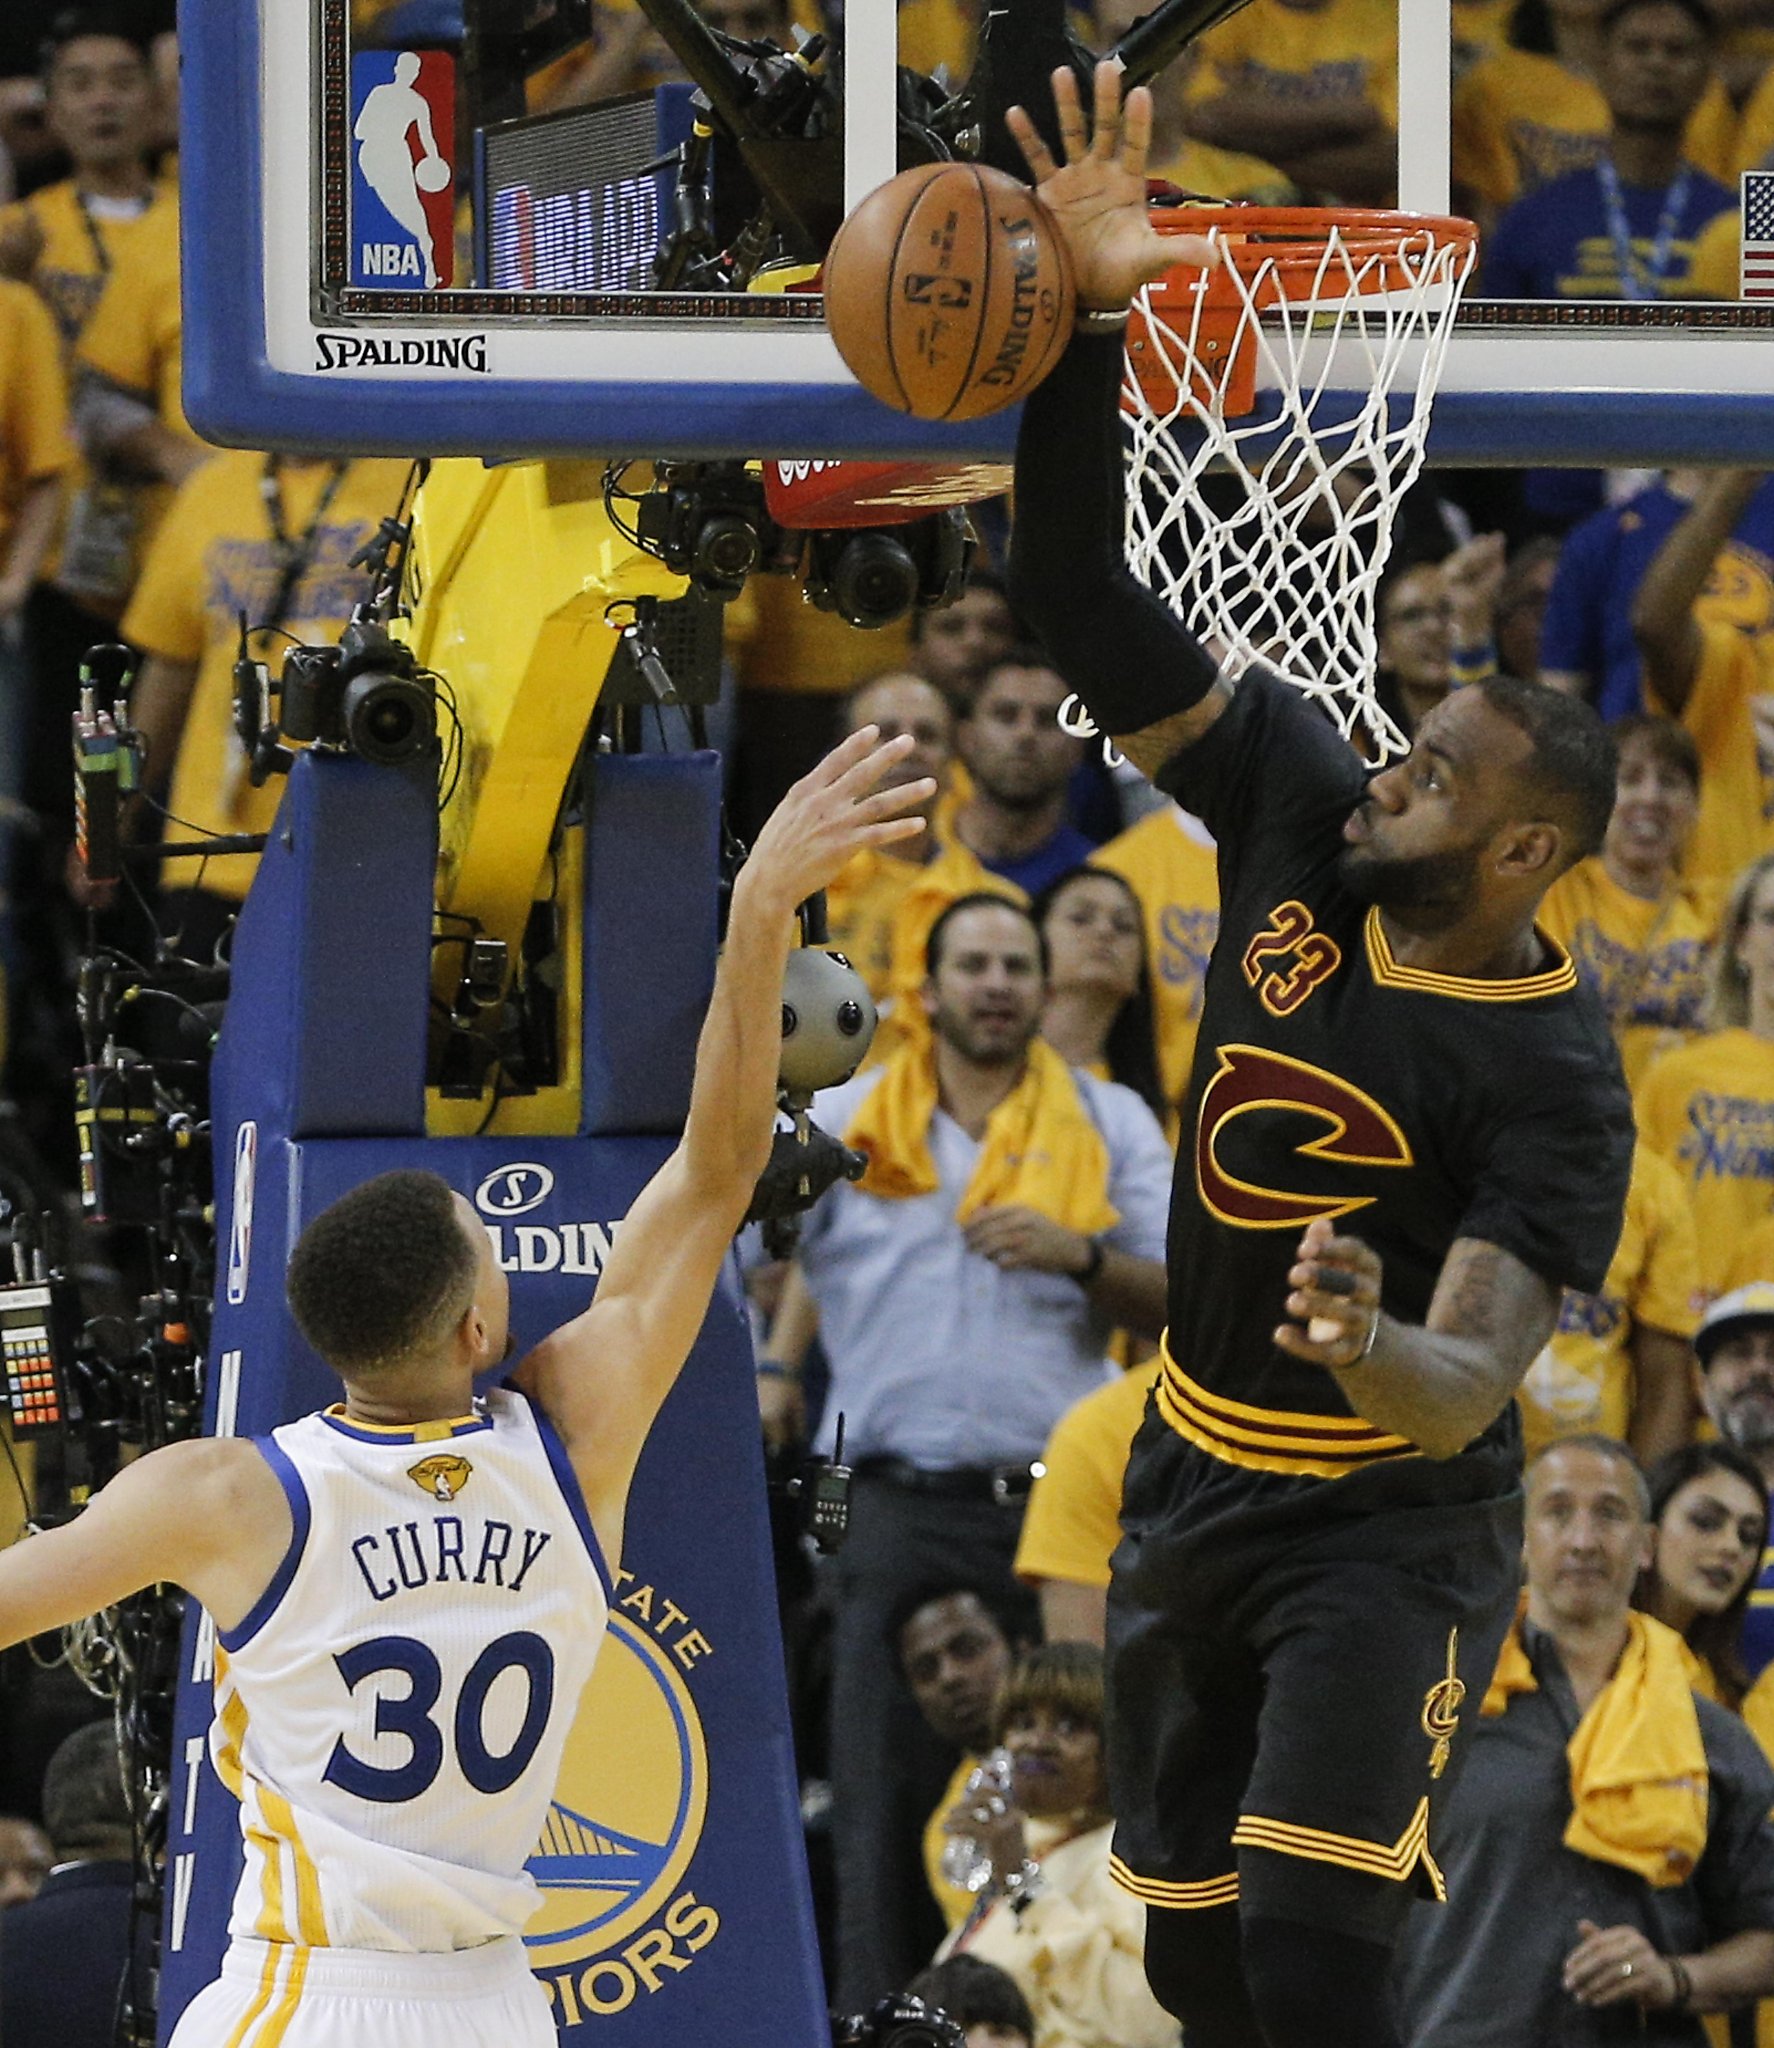 Draymond Green says Curry was baffled by LeBron in GM3